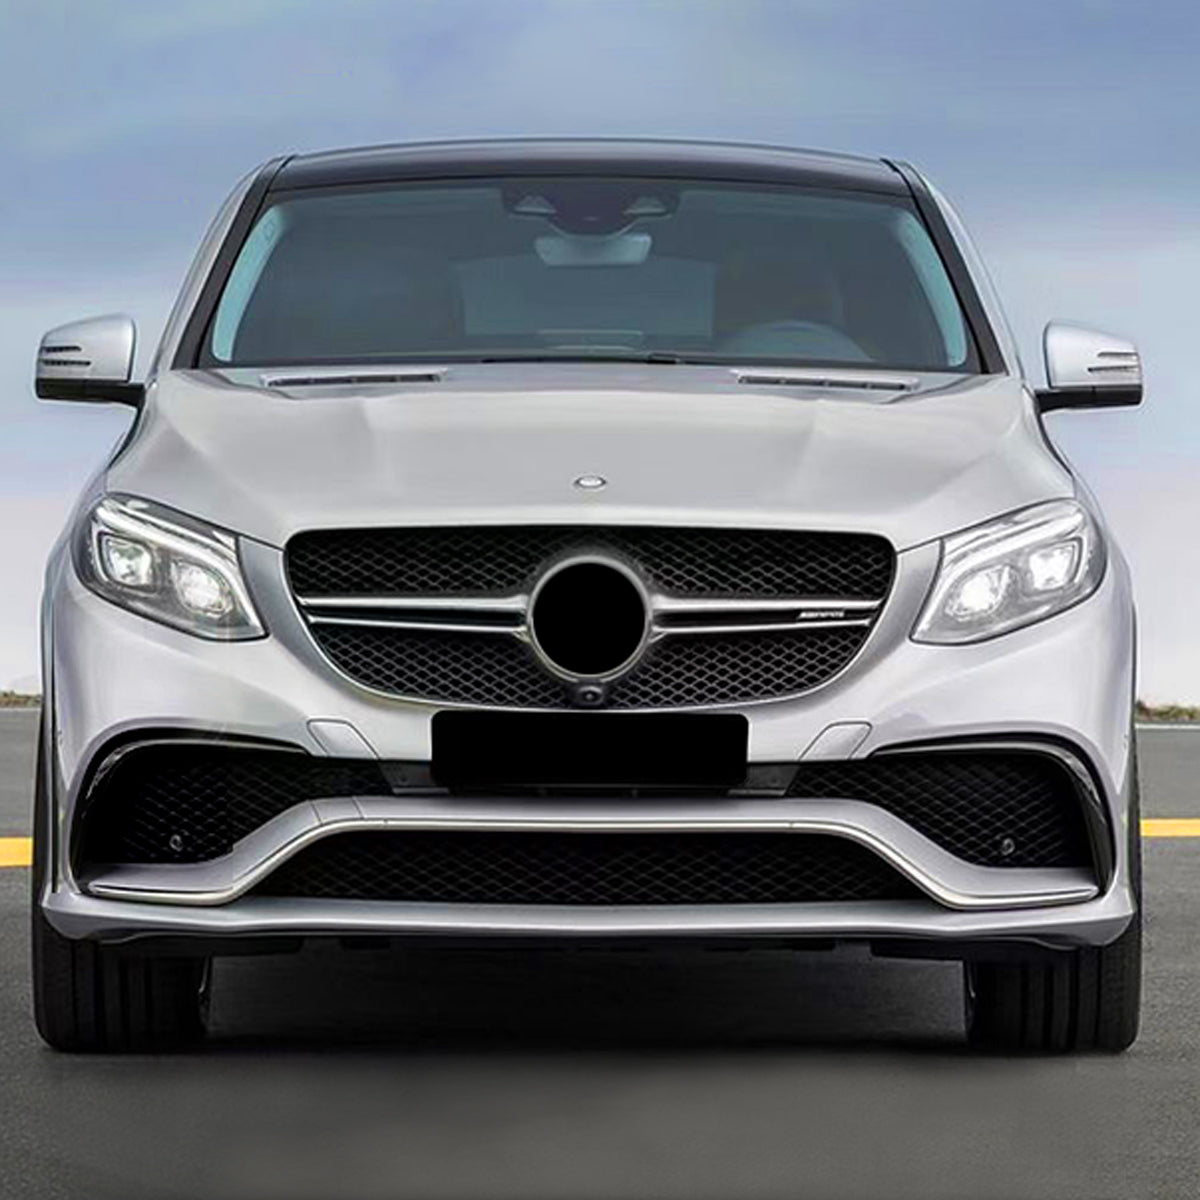 BODY KIT FOR ML-CLASS W166 2012-2014 UPGRADE TO GLE63 AMG 2015-2019